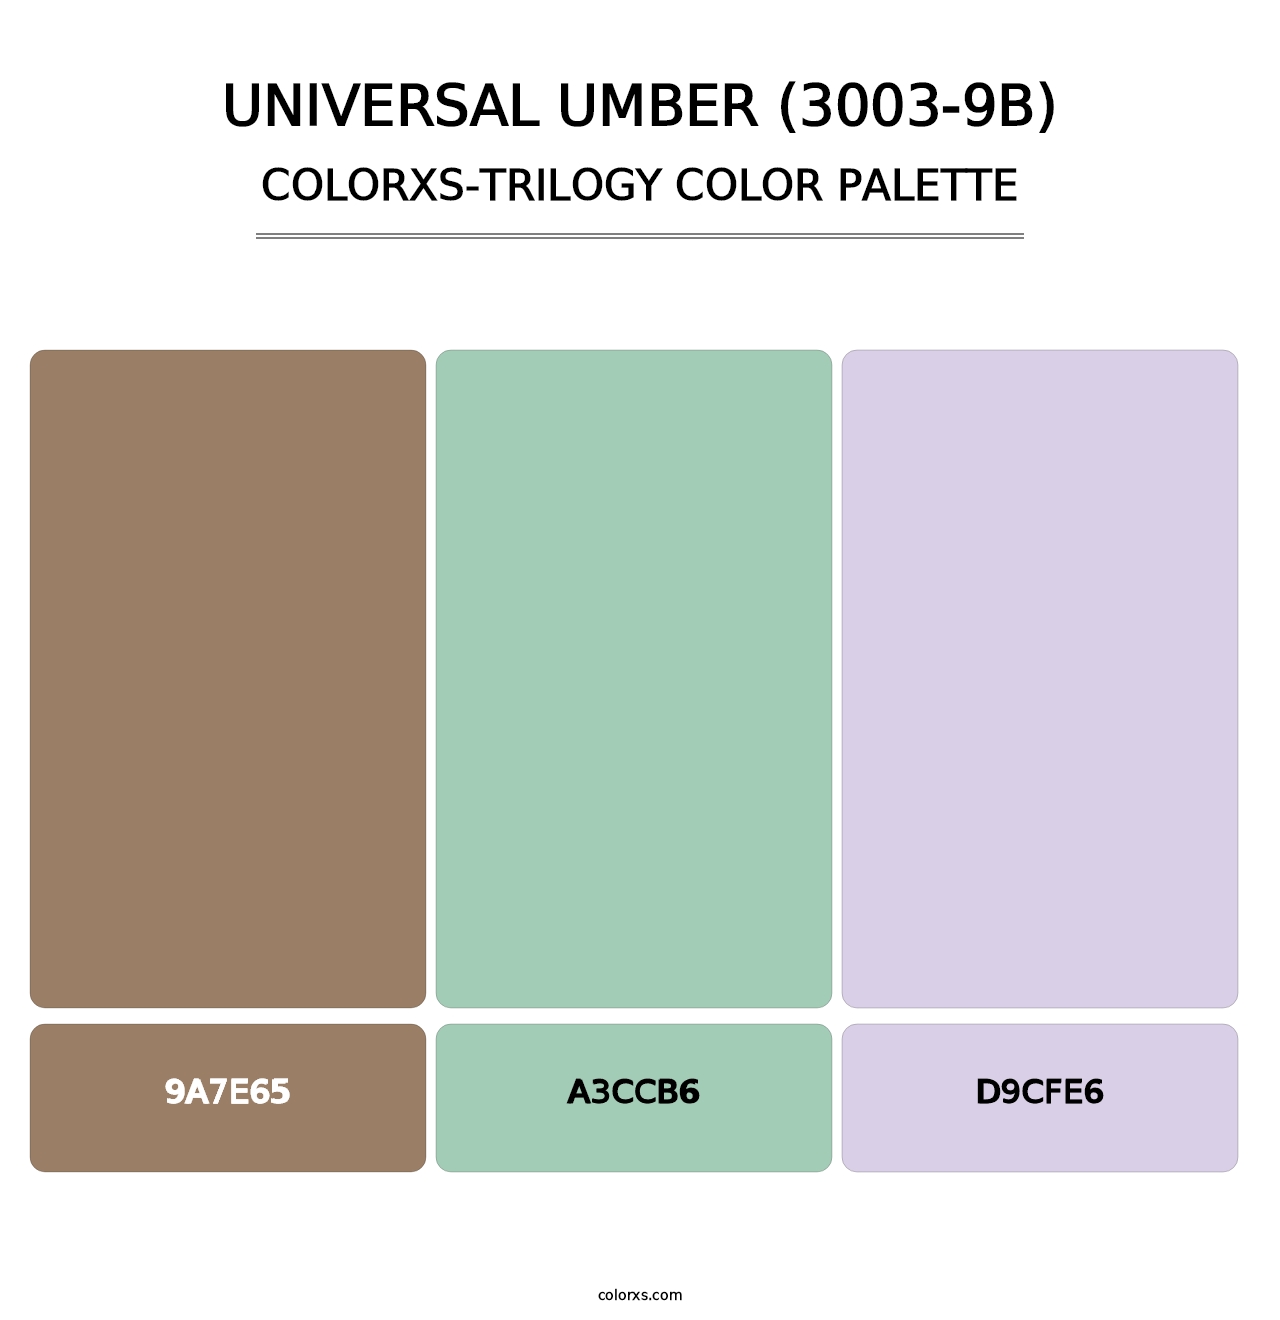 Universal Umber (3003-9B) - Colorxs Trilogy Palette